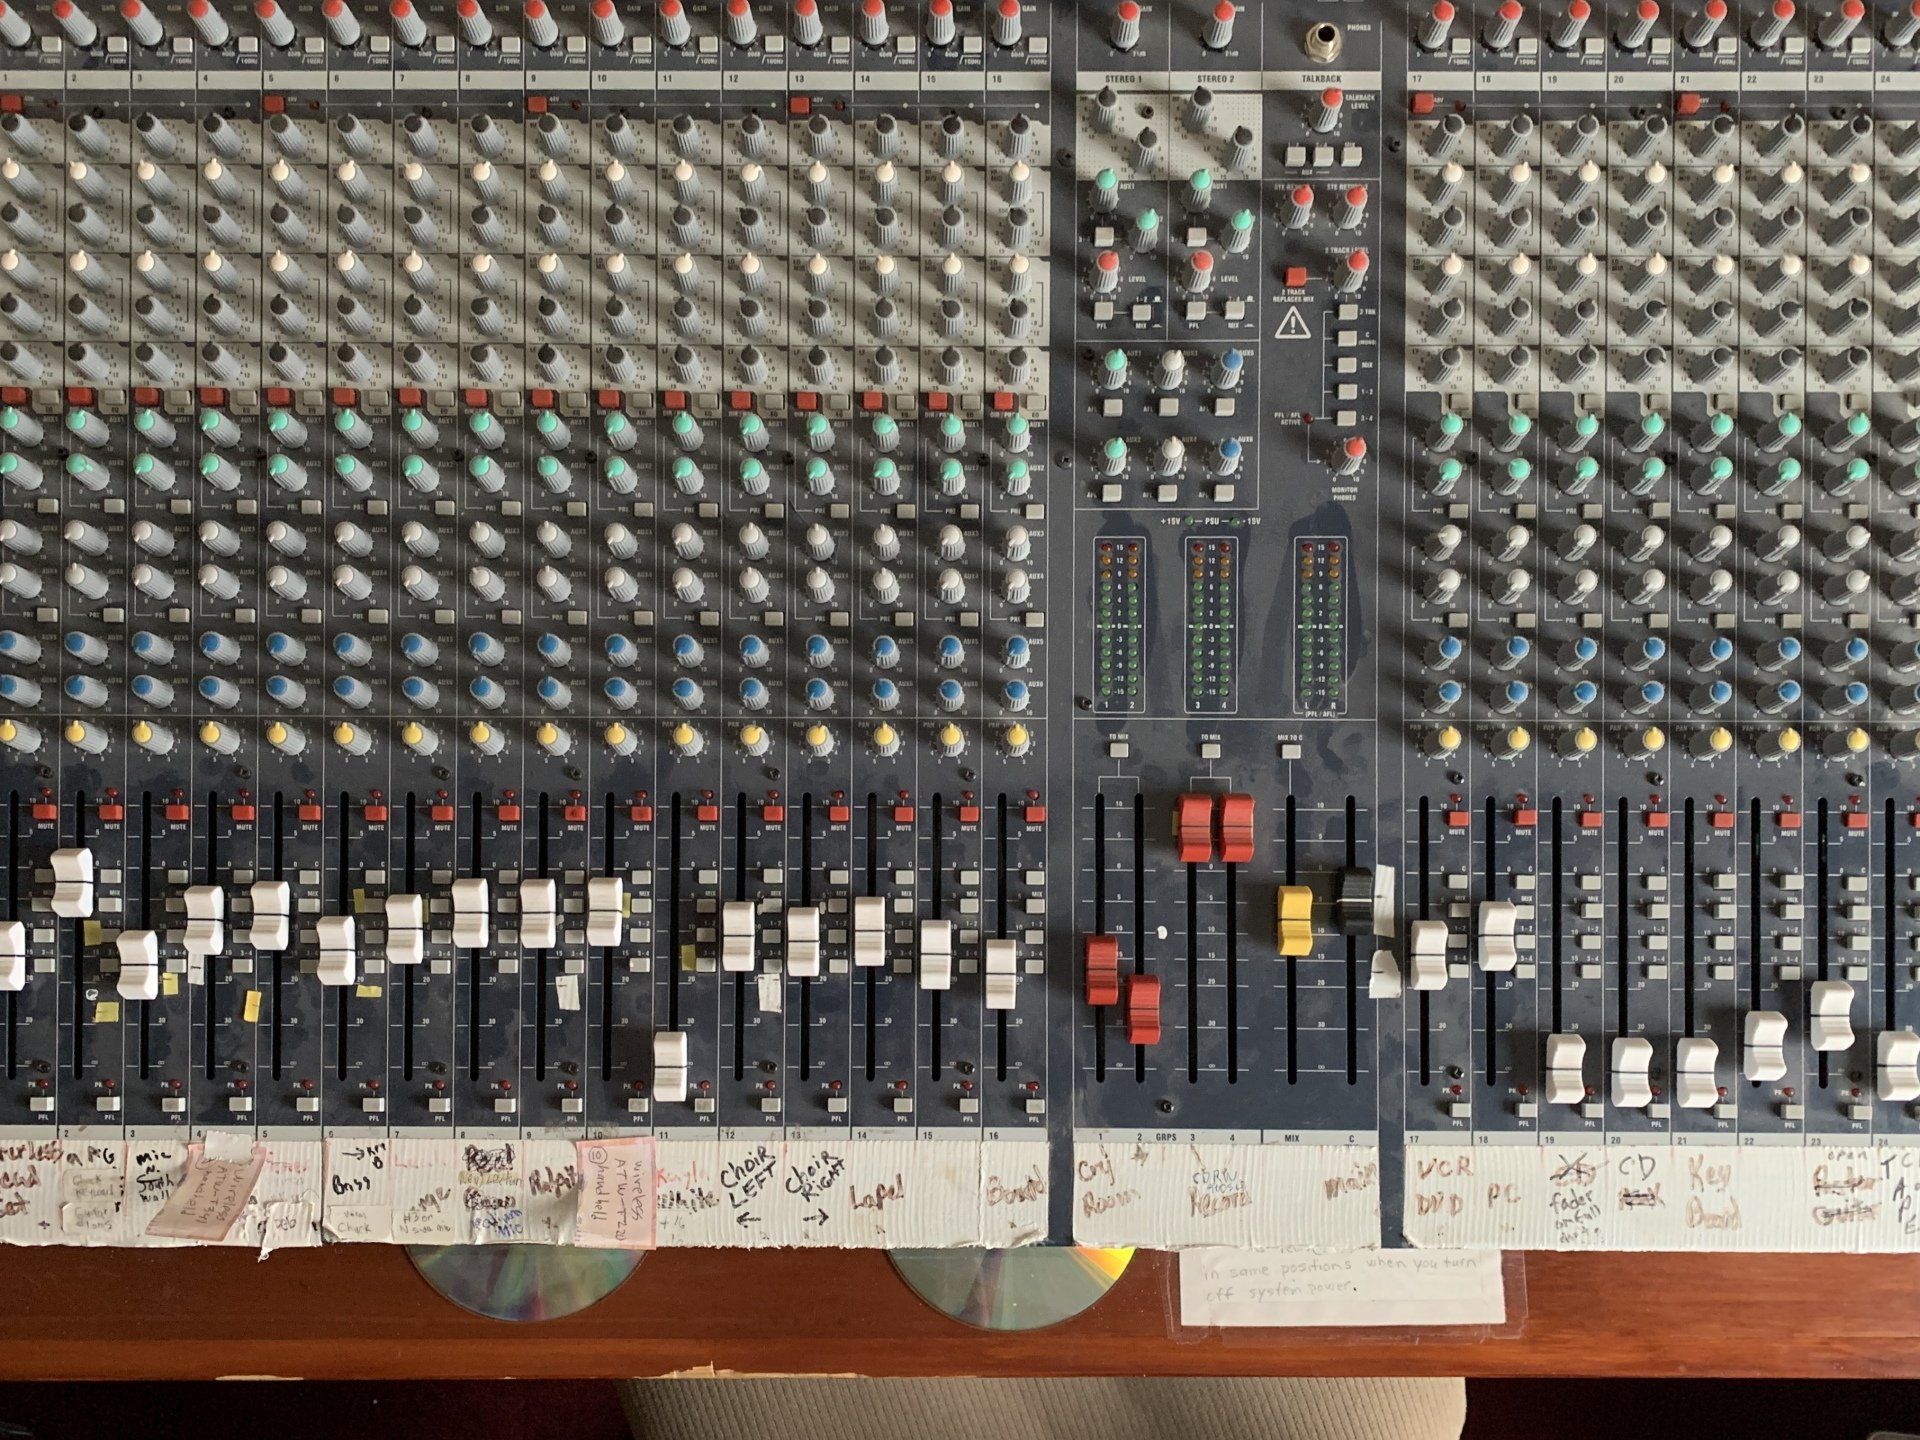 A mixer with a lot of knobs and buttons on it